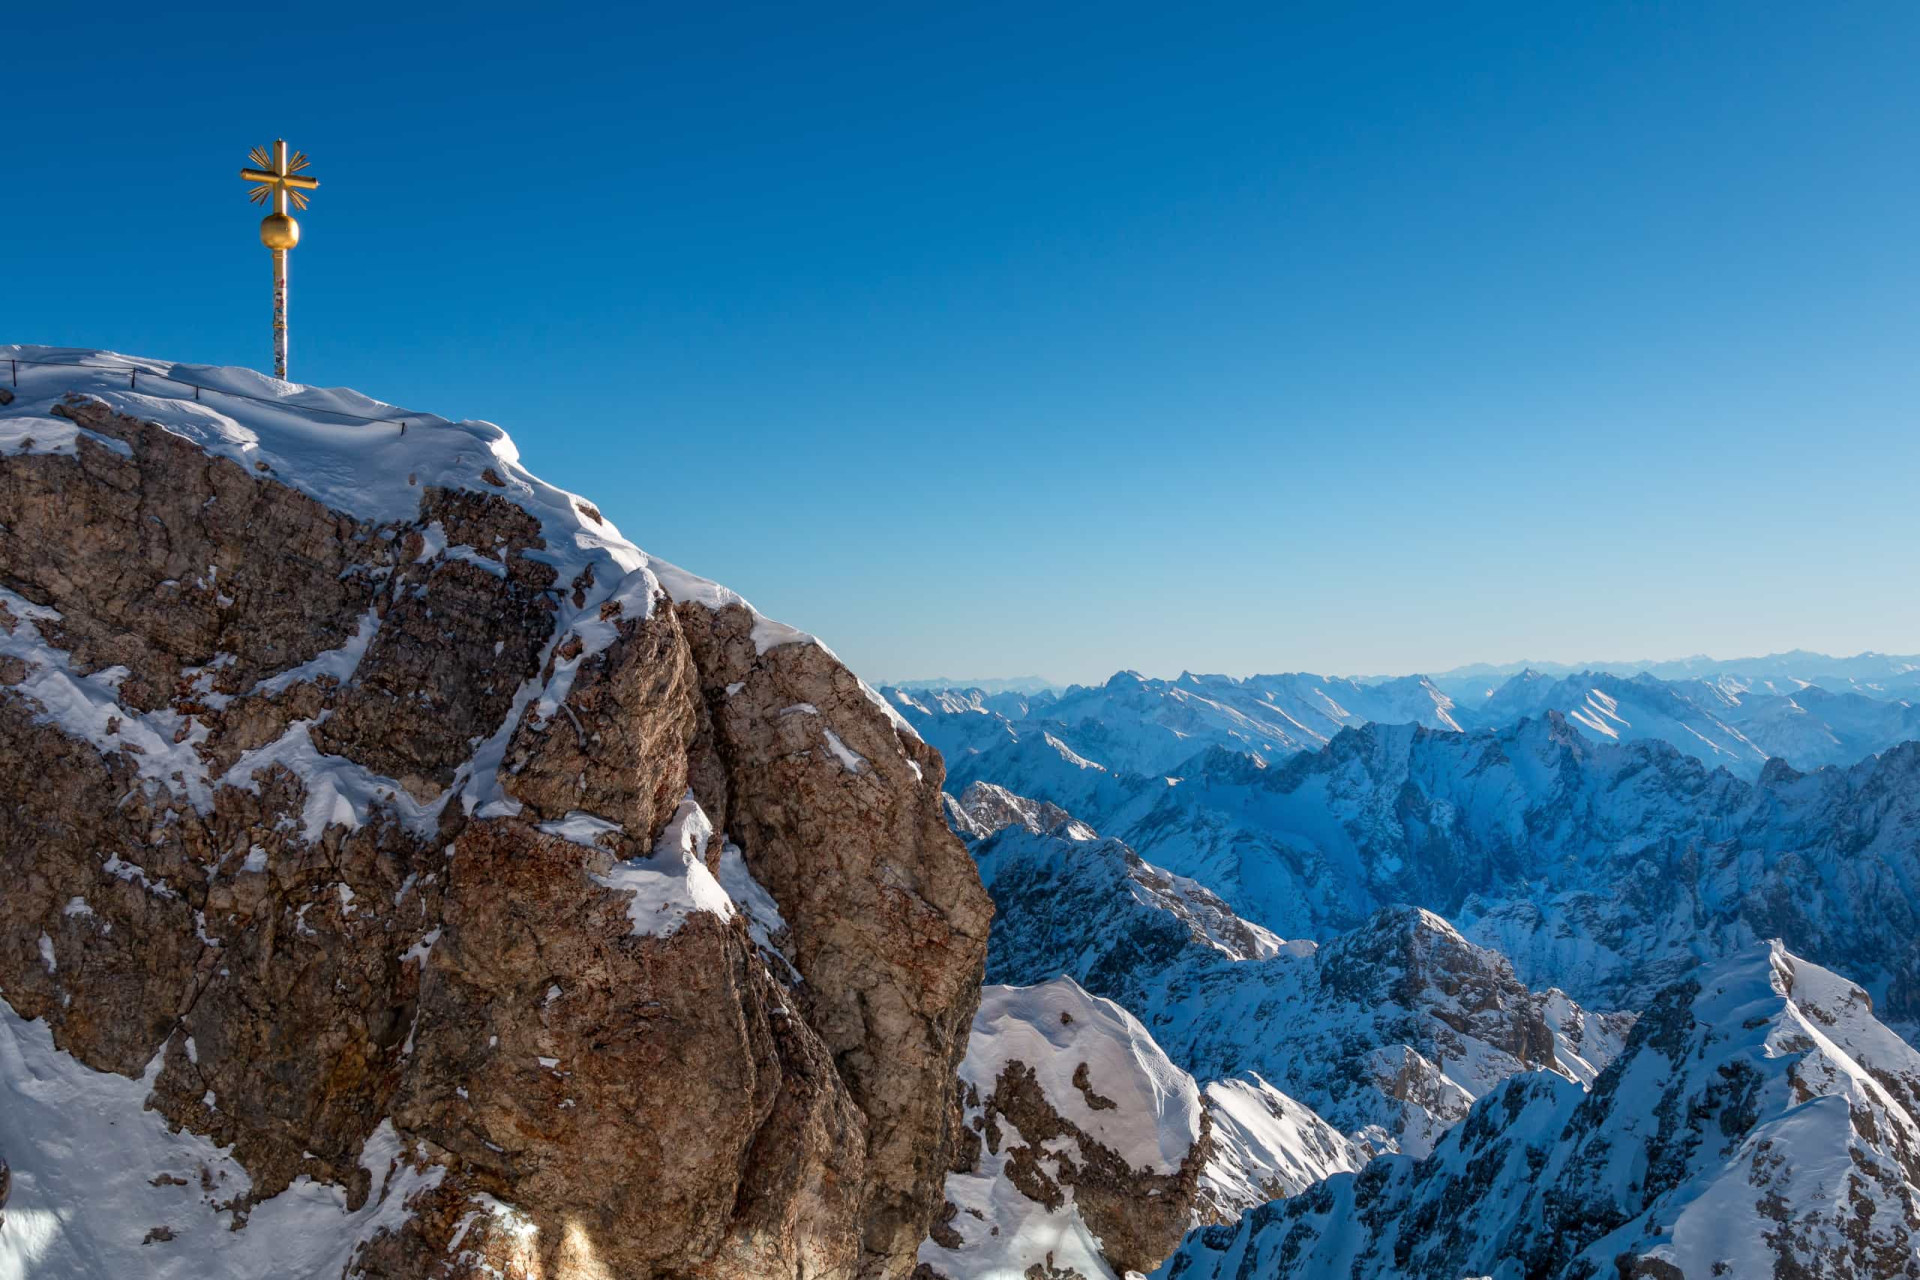 <p>At 2,962 m (9, 718 ft) above sea level, Zugspitze in the Wetterstein Mountains is Germany's highest peak. Cable cars run visitors to the summit where you can soak in some of the best views of the Alps over refreshments in a beer garden.</p><p><a href="https://www.msn.com/en-us/community/channel/vid-7xx8mnucu55yw63we9va2gwr7uihbxwc68fxqp25x6tg4ftibpra?cvid=94631541bc0f4f89bfd59158d696ad7e">Follow us and access great exclusive content every day</a></p>